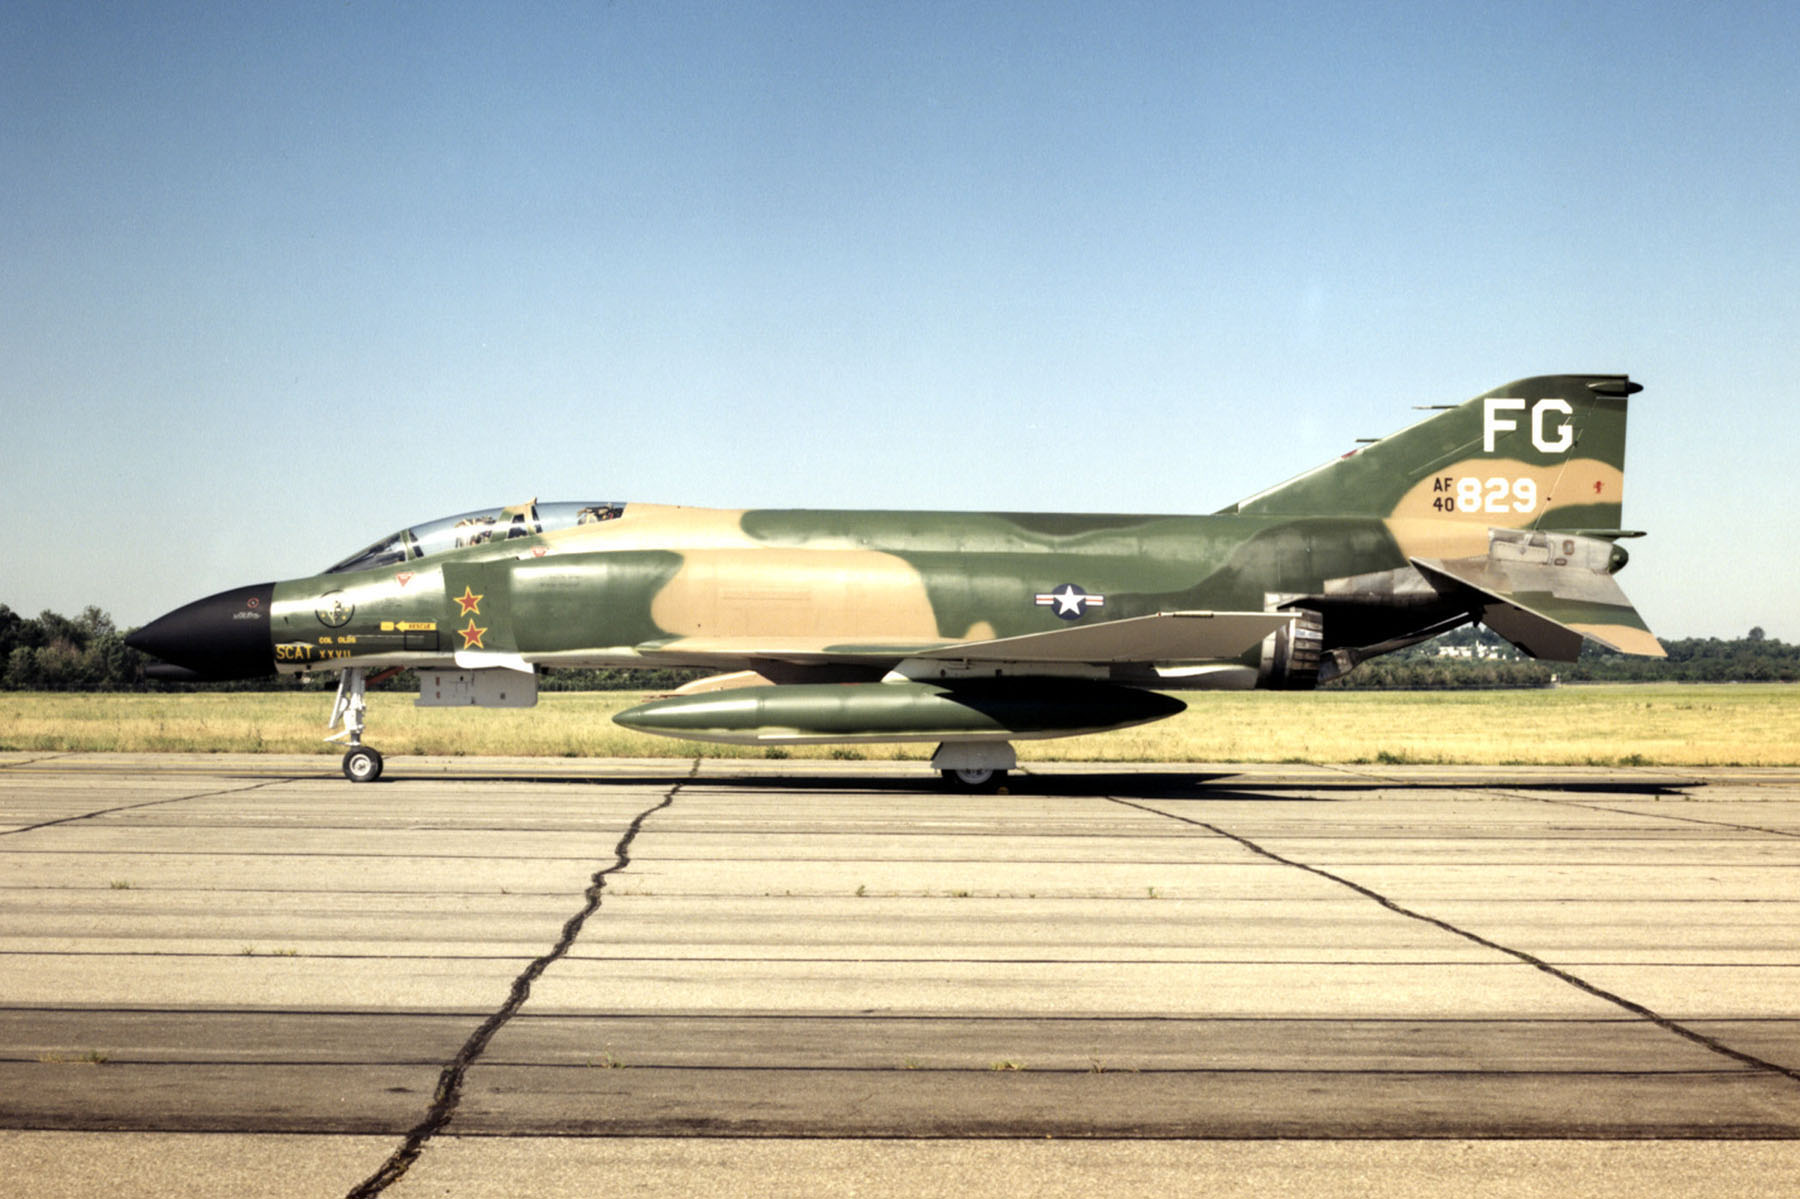 Colonel Robin Olds flew this McDonnell F-4C-24-MC Phantom II, 64-0829, SCAT XXVII, when he and 1st Lieutenant Stephen B. Croker shot down two VPAF MiG-17s near Haiphong, North Vietnam, 20 May 1967. (U.S. Air Force)